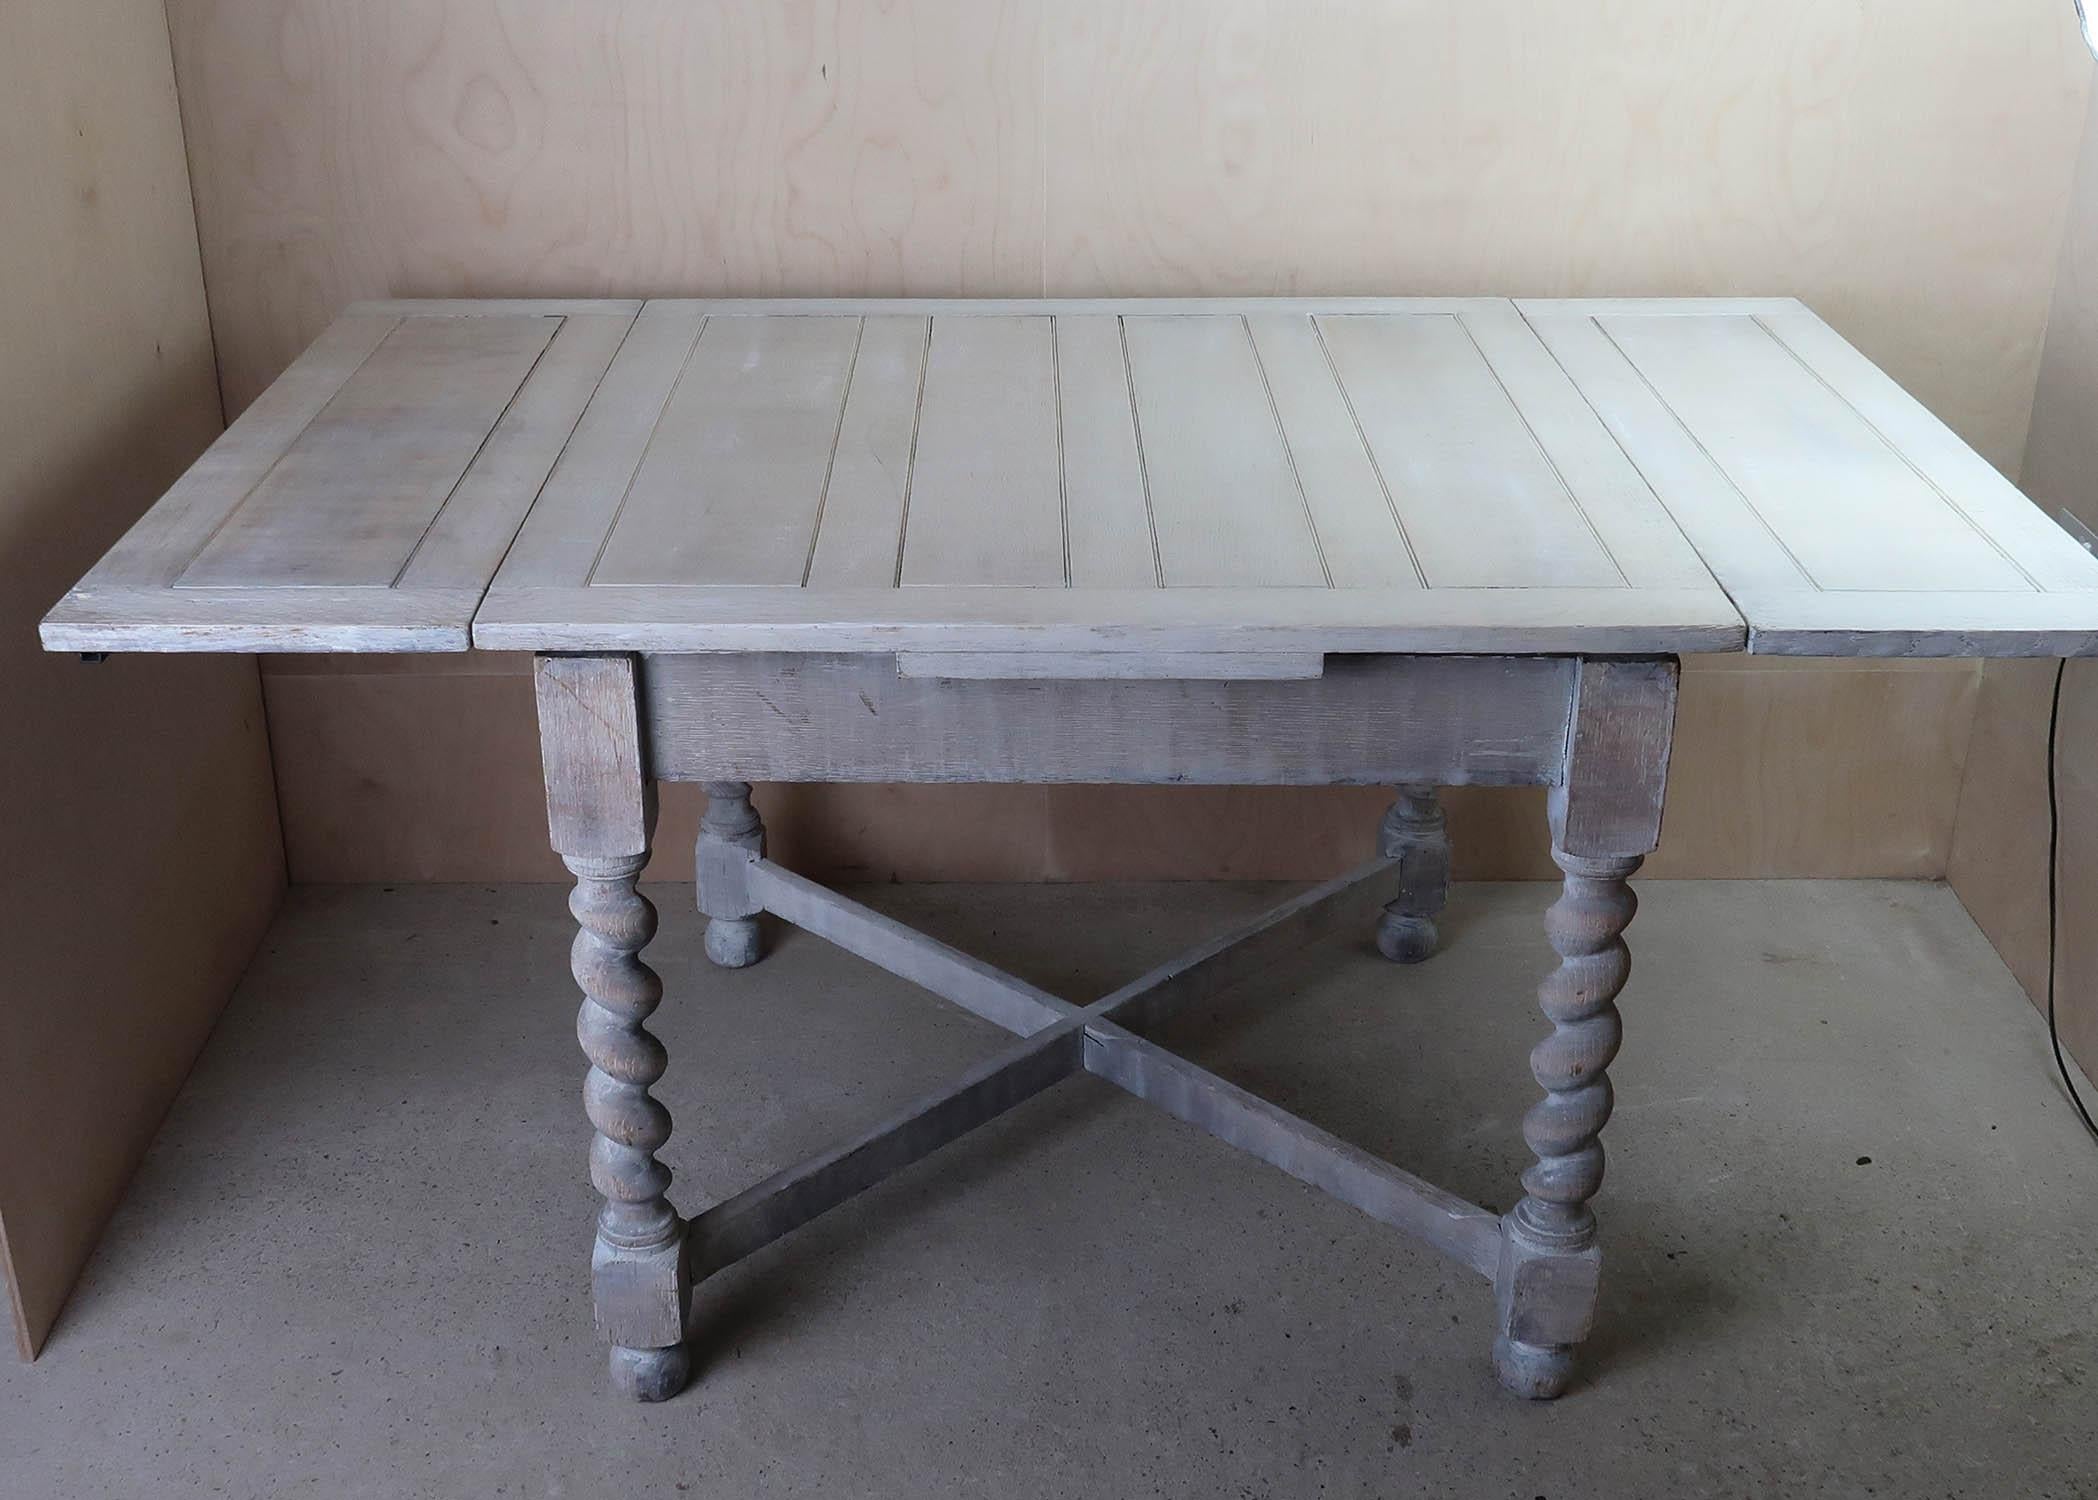 A lovely limed oak dining or kitchen table with barley twist supports.

It is a draw leaf table so it gives you the option of having the leaves pushed under the top to make a smaller square table.

The measurement below is the maximum. Without